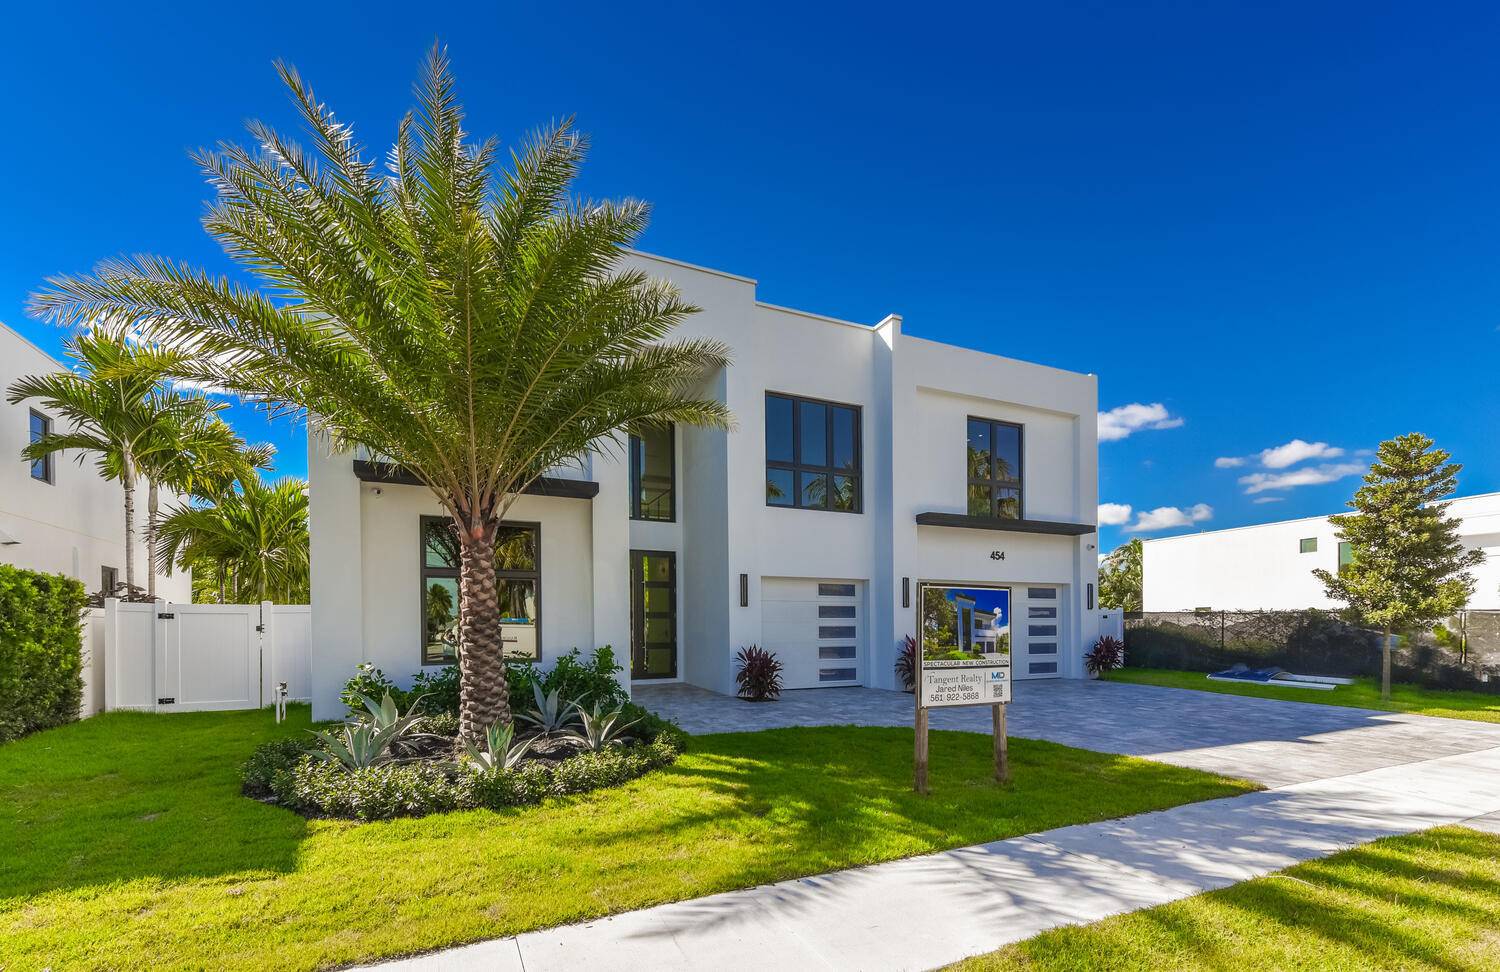 The Best of SoSo ! Six bedrooms estate home just minutes from West Palm Beach's hot spots !